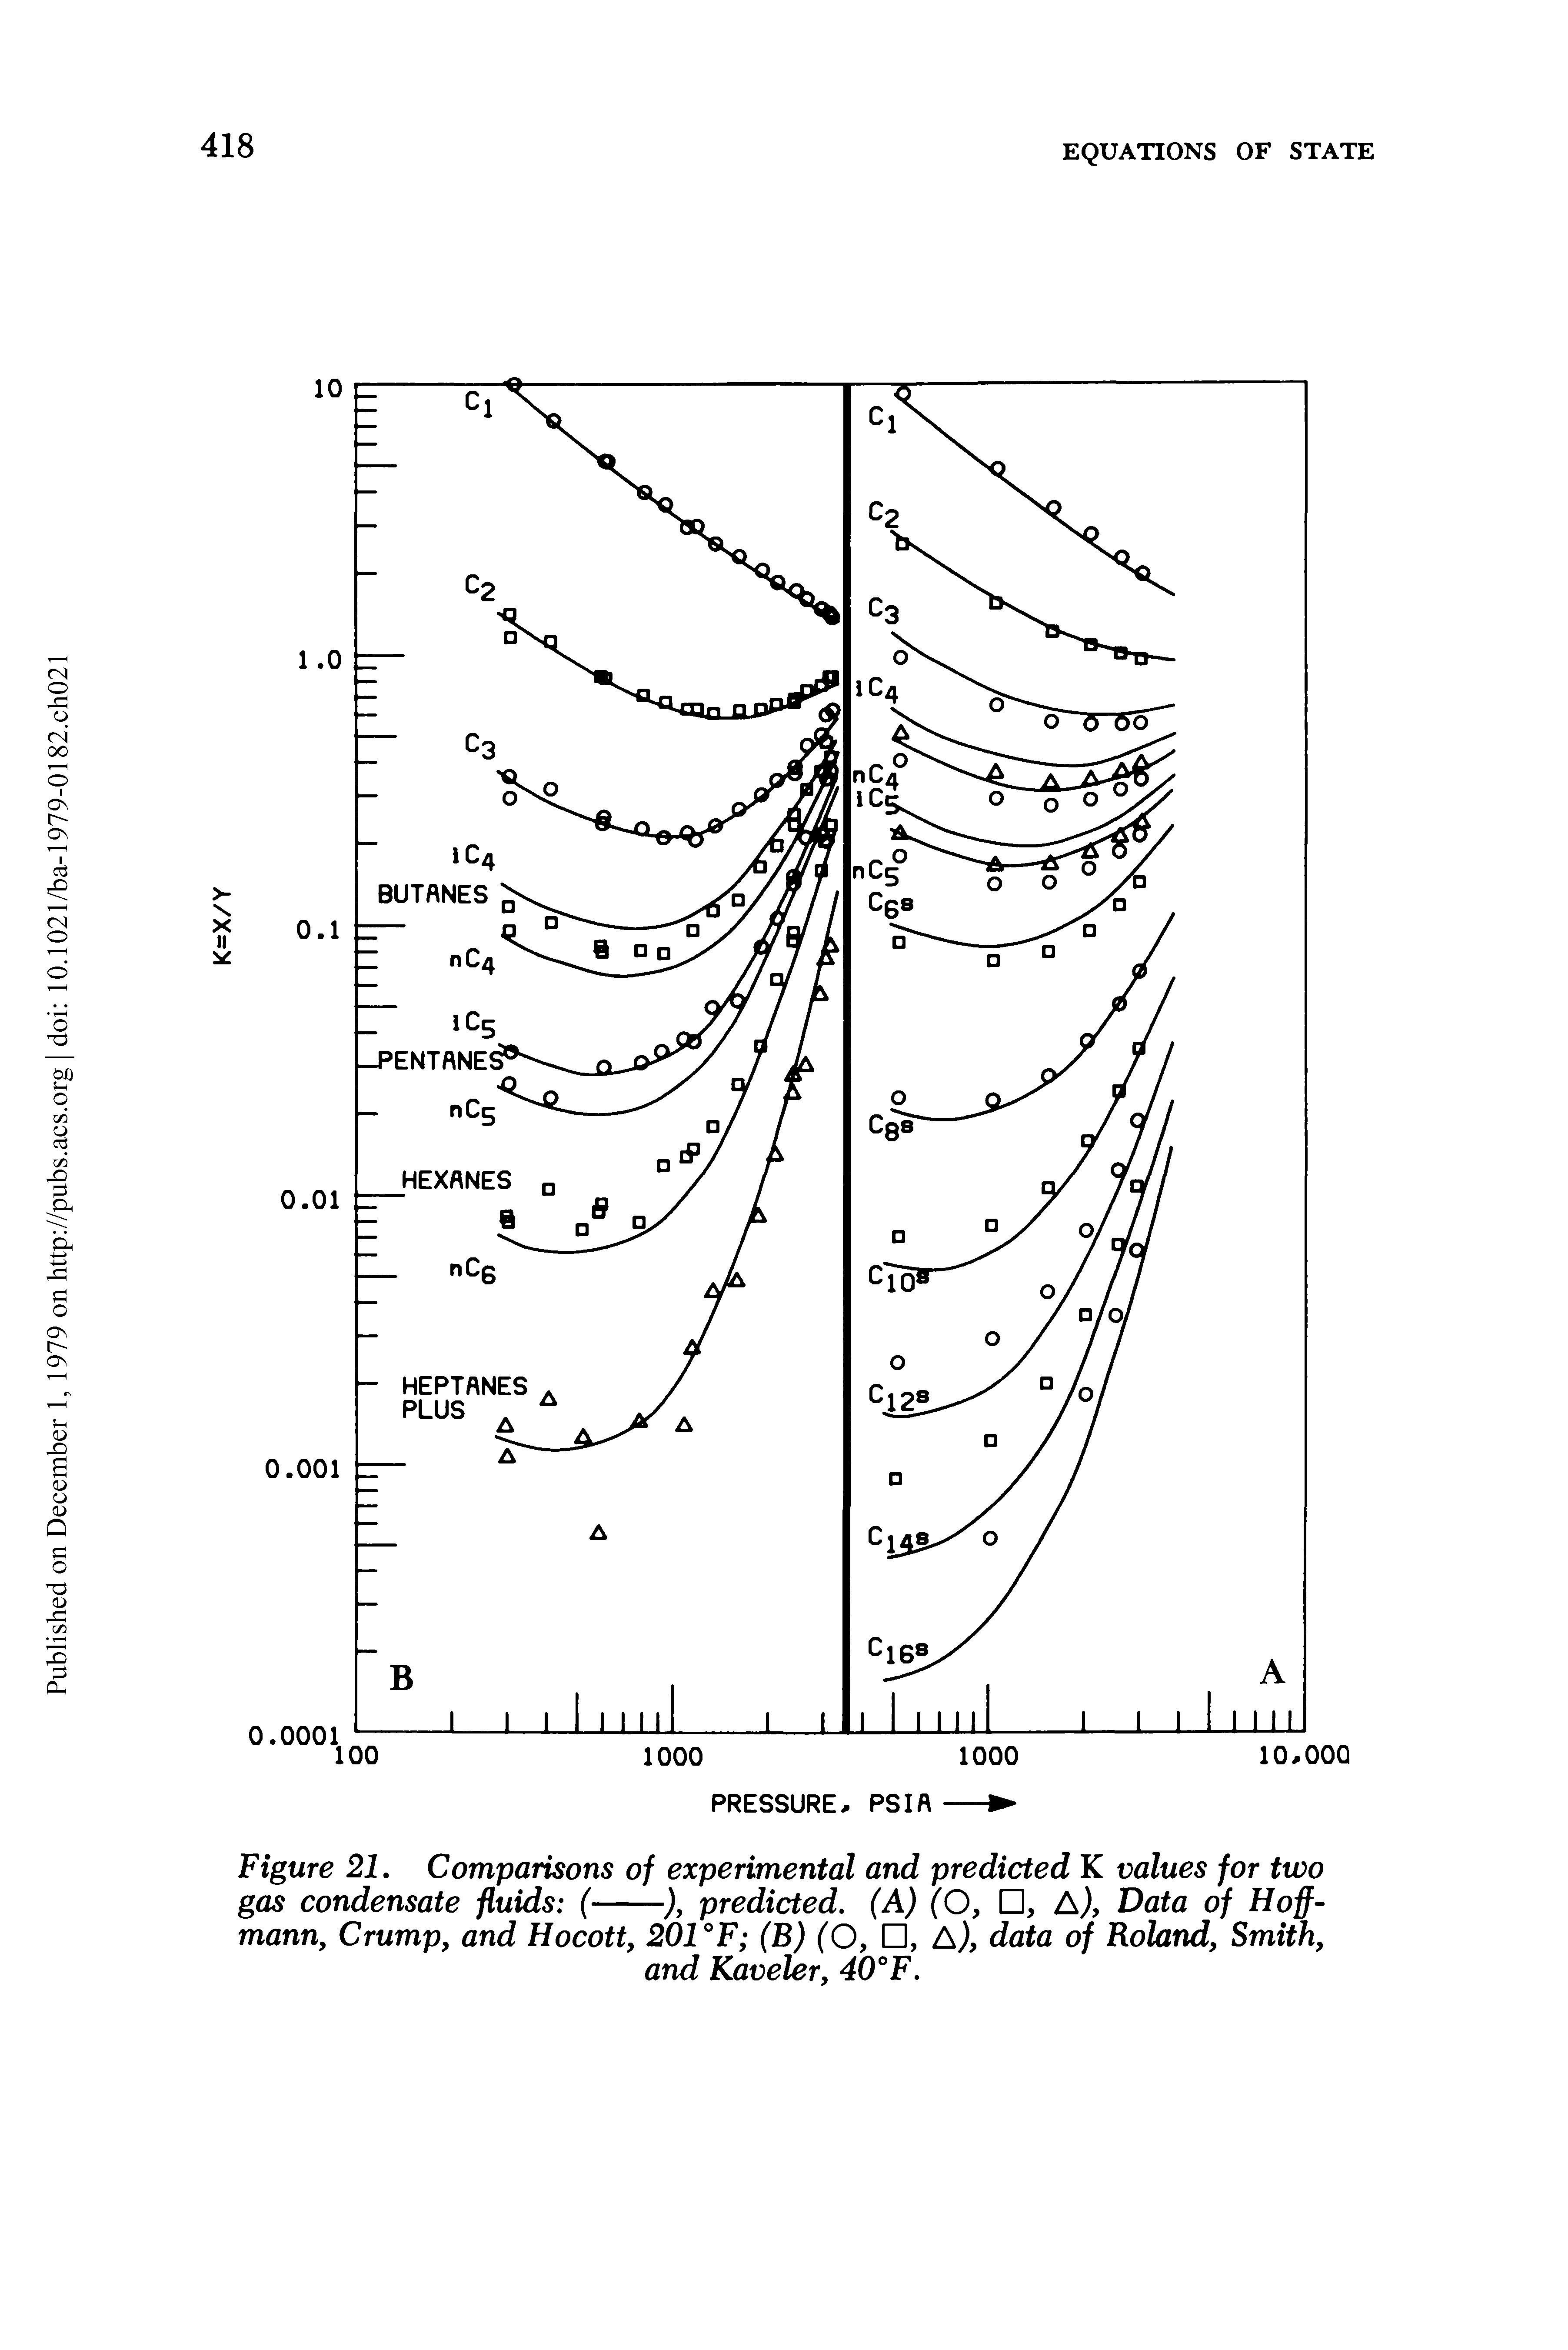 Figure 21. Comparisons of experimental and predicted K values for two gas condensate fluids (----), predicted. (A) (O, , A), Data of Hoff-...